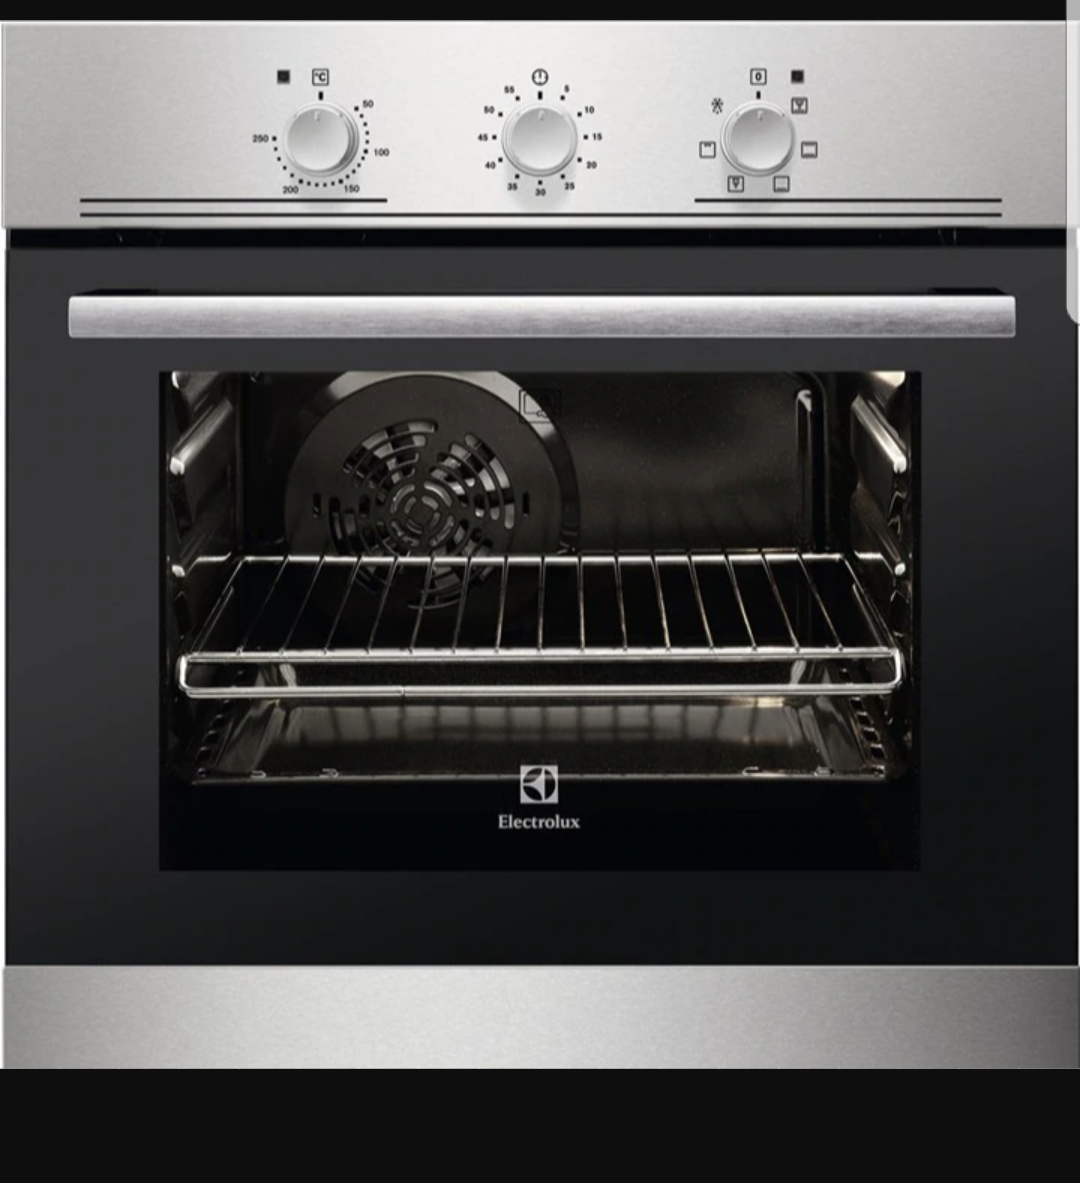 It has a cooling fan and it is easy to clean. Best oven for baking - Shop Journey